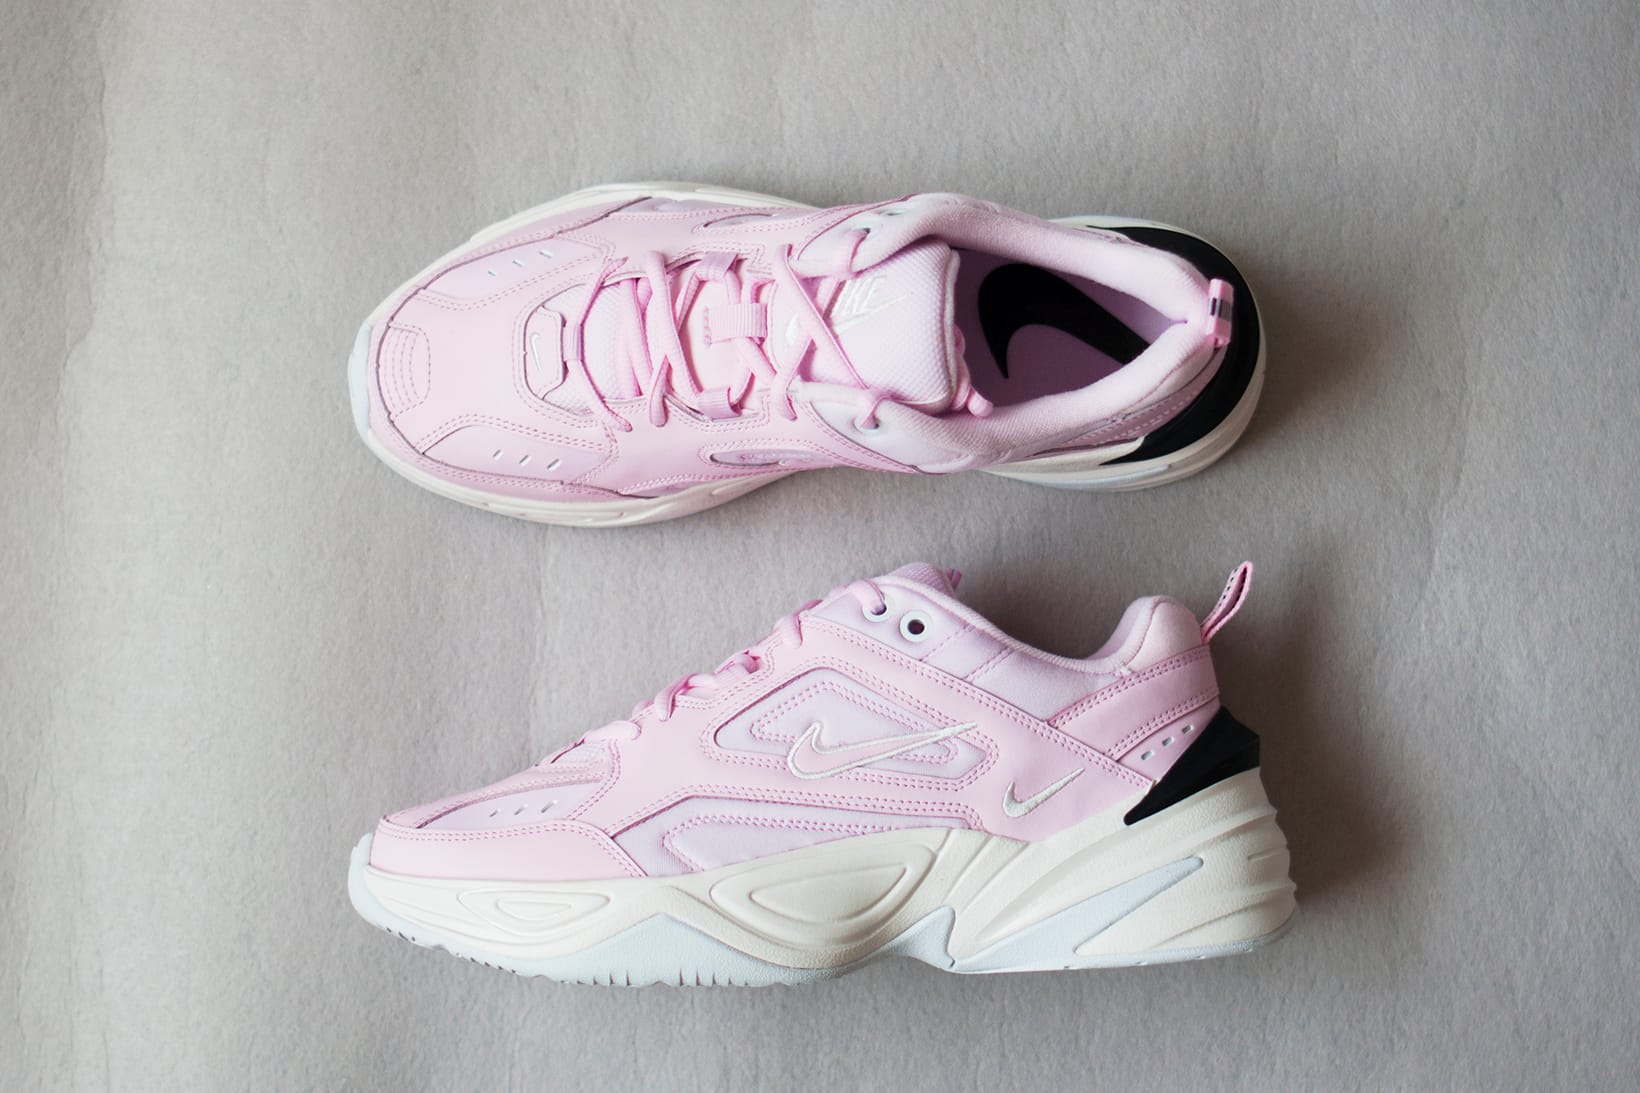 Unboxing of Nike's Pink M2K Tekno 